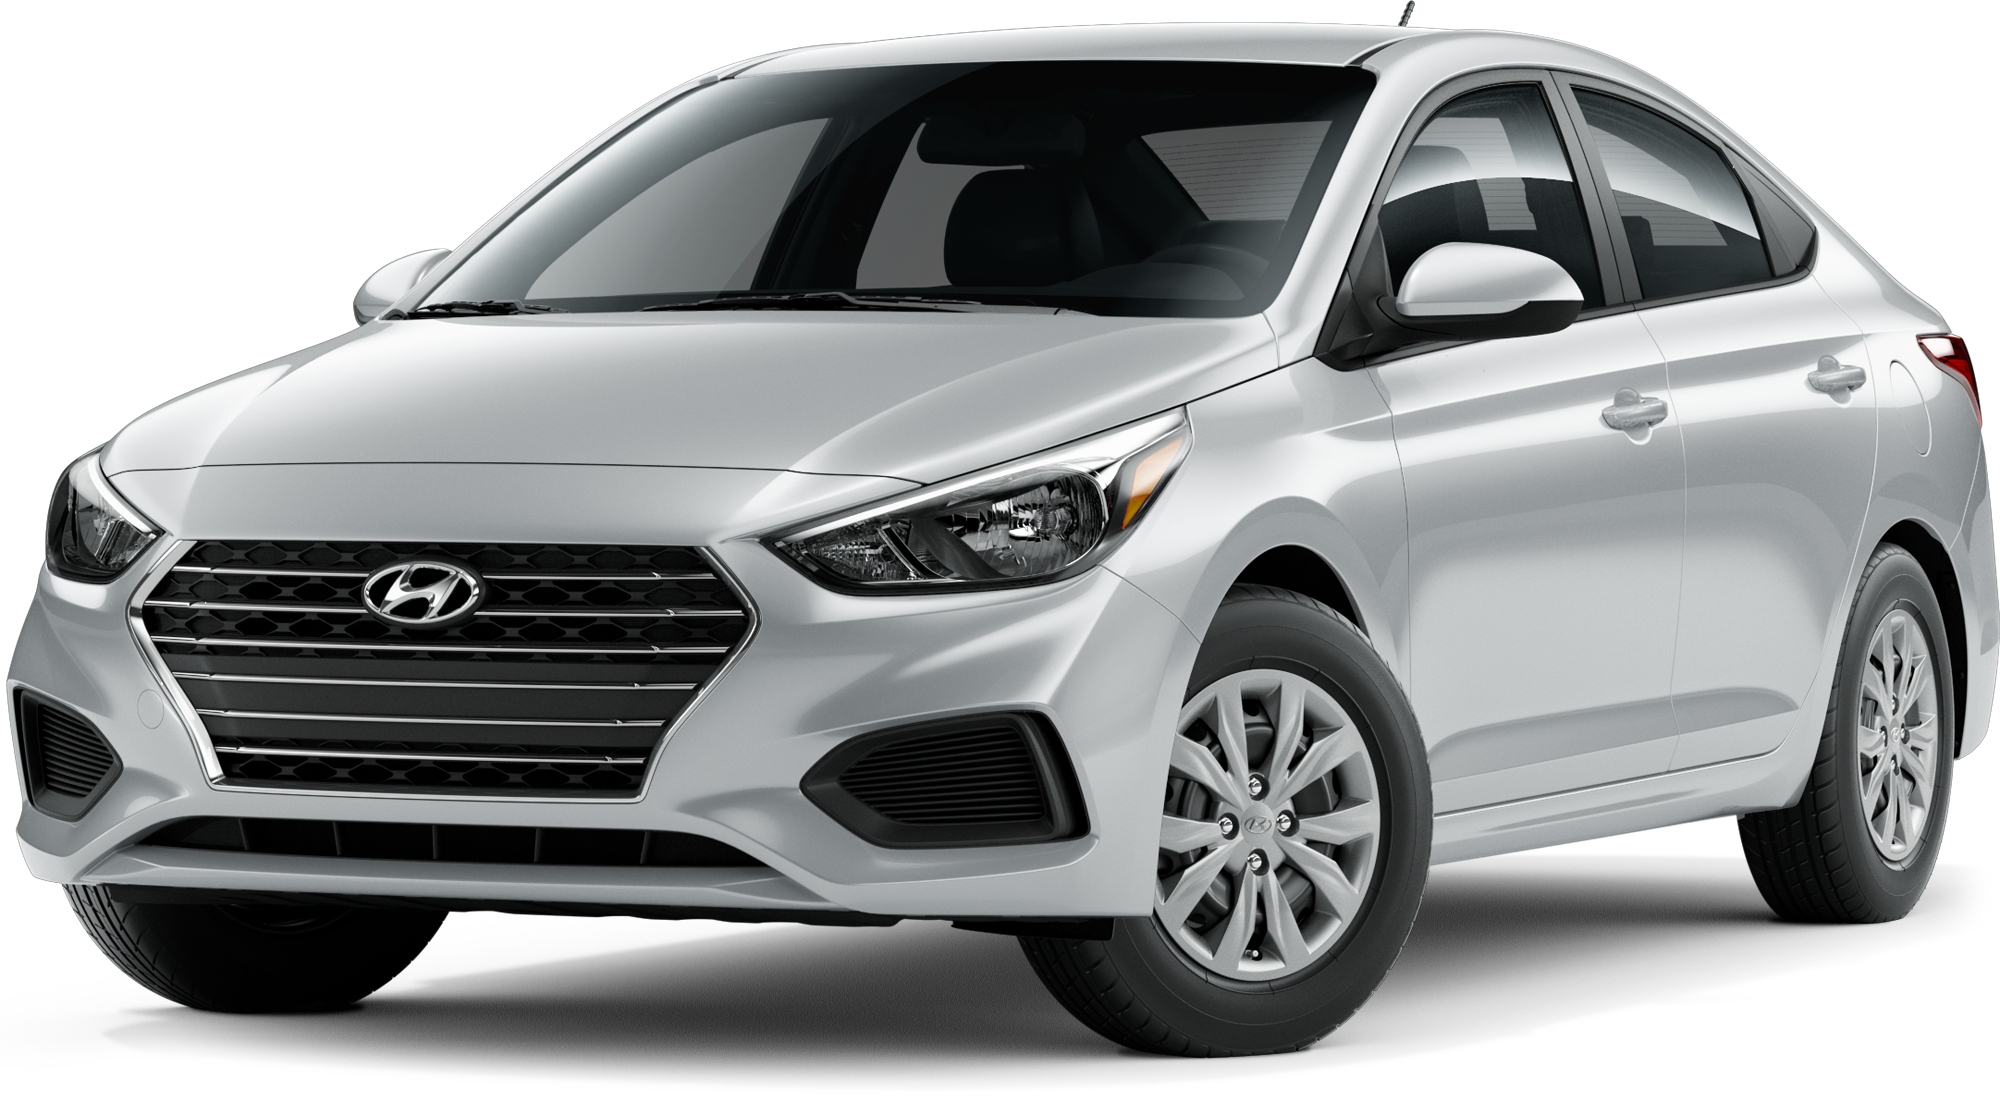 2021 Hyundai Accent Incentives, Specials & Offers in Fond du Lac WI